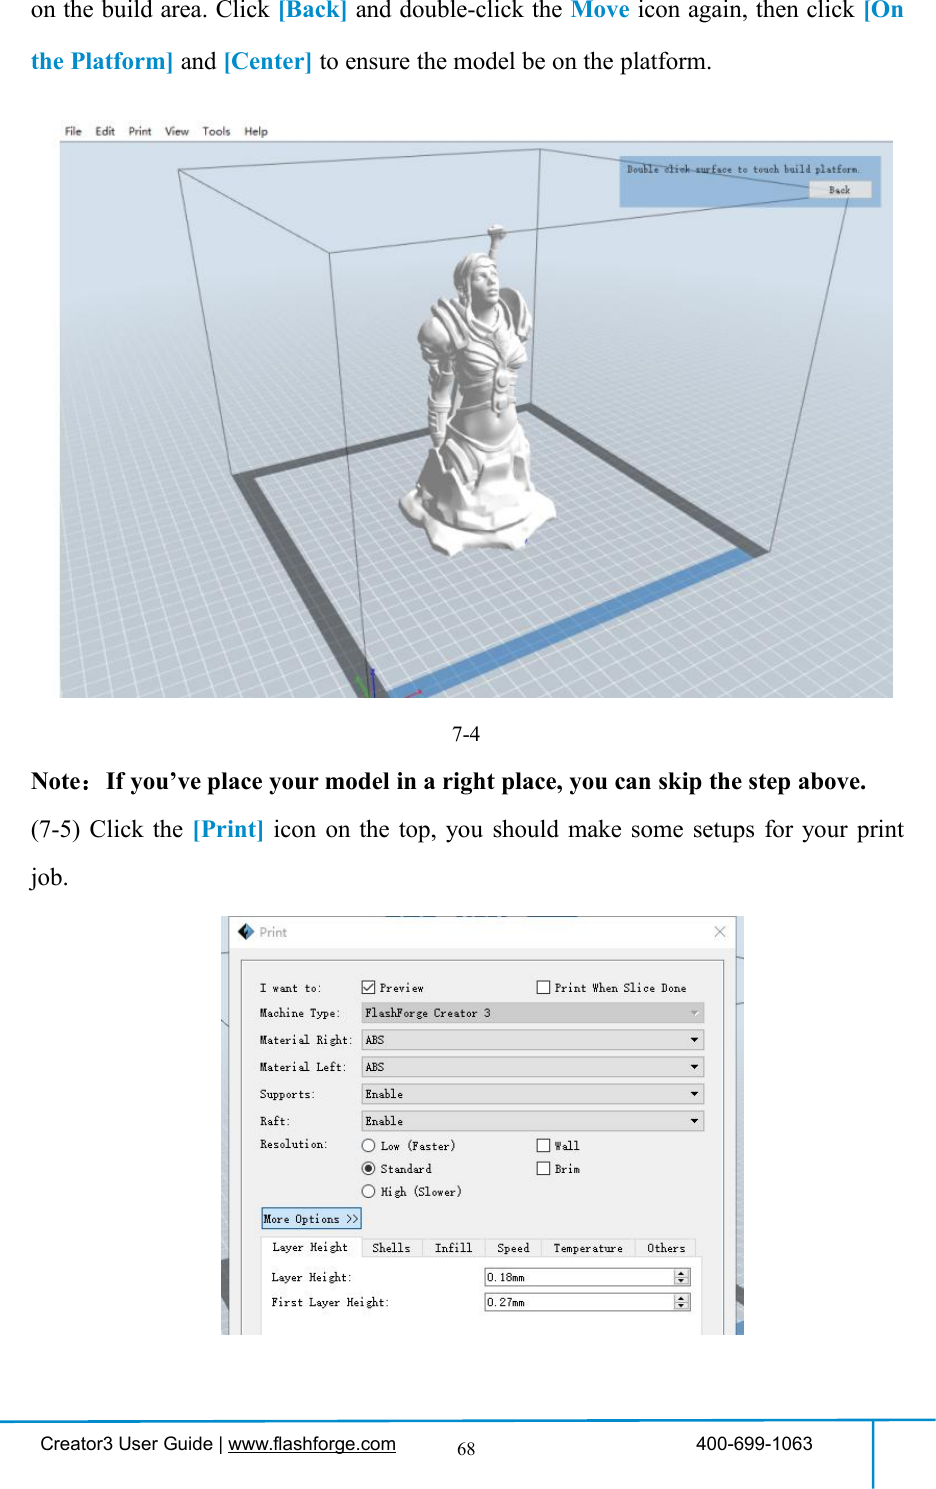 Creator3 User Guide | www.flashforge.com 400-699-106368on the build area. Click [Back] and double-click the Move icon again, then click [Onthe Platform] and [Center] to ensure the model be on the platform.7-4Note：If you’ve place your model in a right place, you can skip the step above.(7-5) Click the [Print] icon on the top, you should make some setups for your printjob.